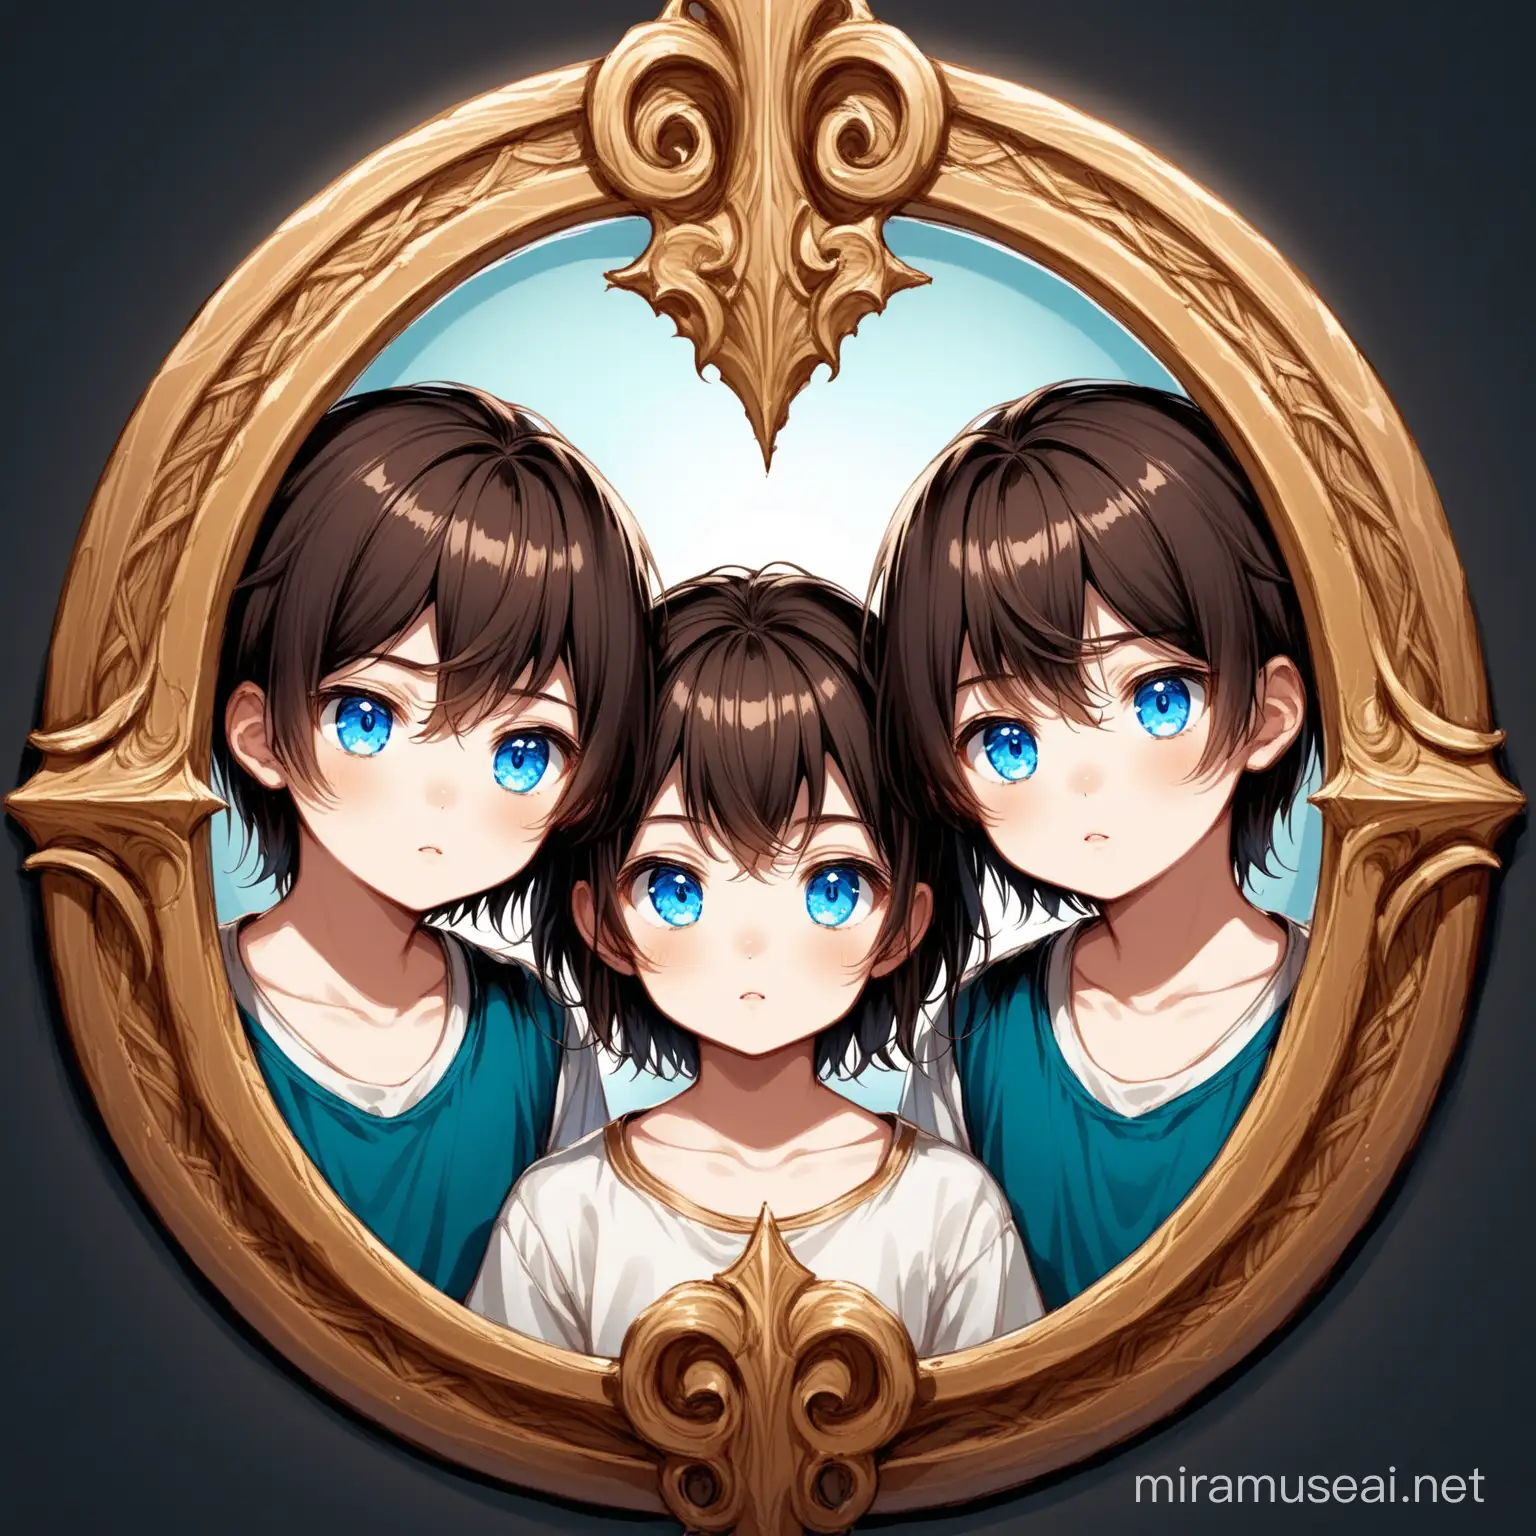 A twin boy and a twin girl on each side or  an ancient mirror. they look identical with blue eyes and messy dark brown hair.
